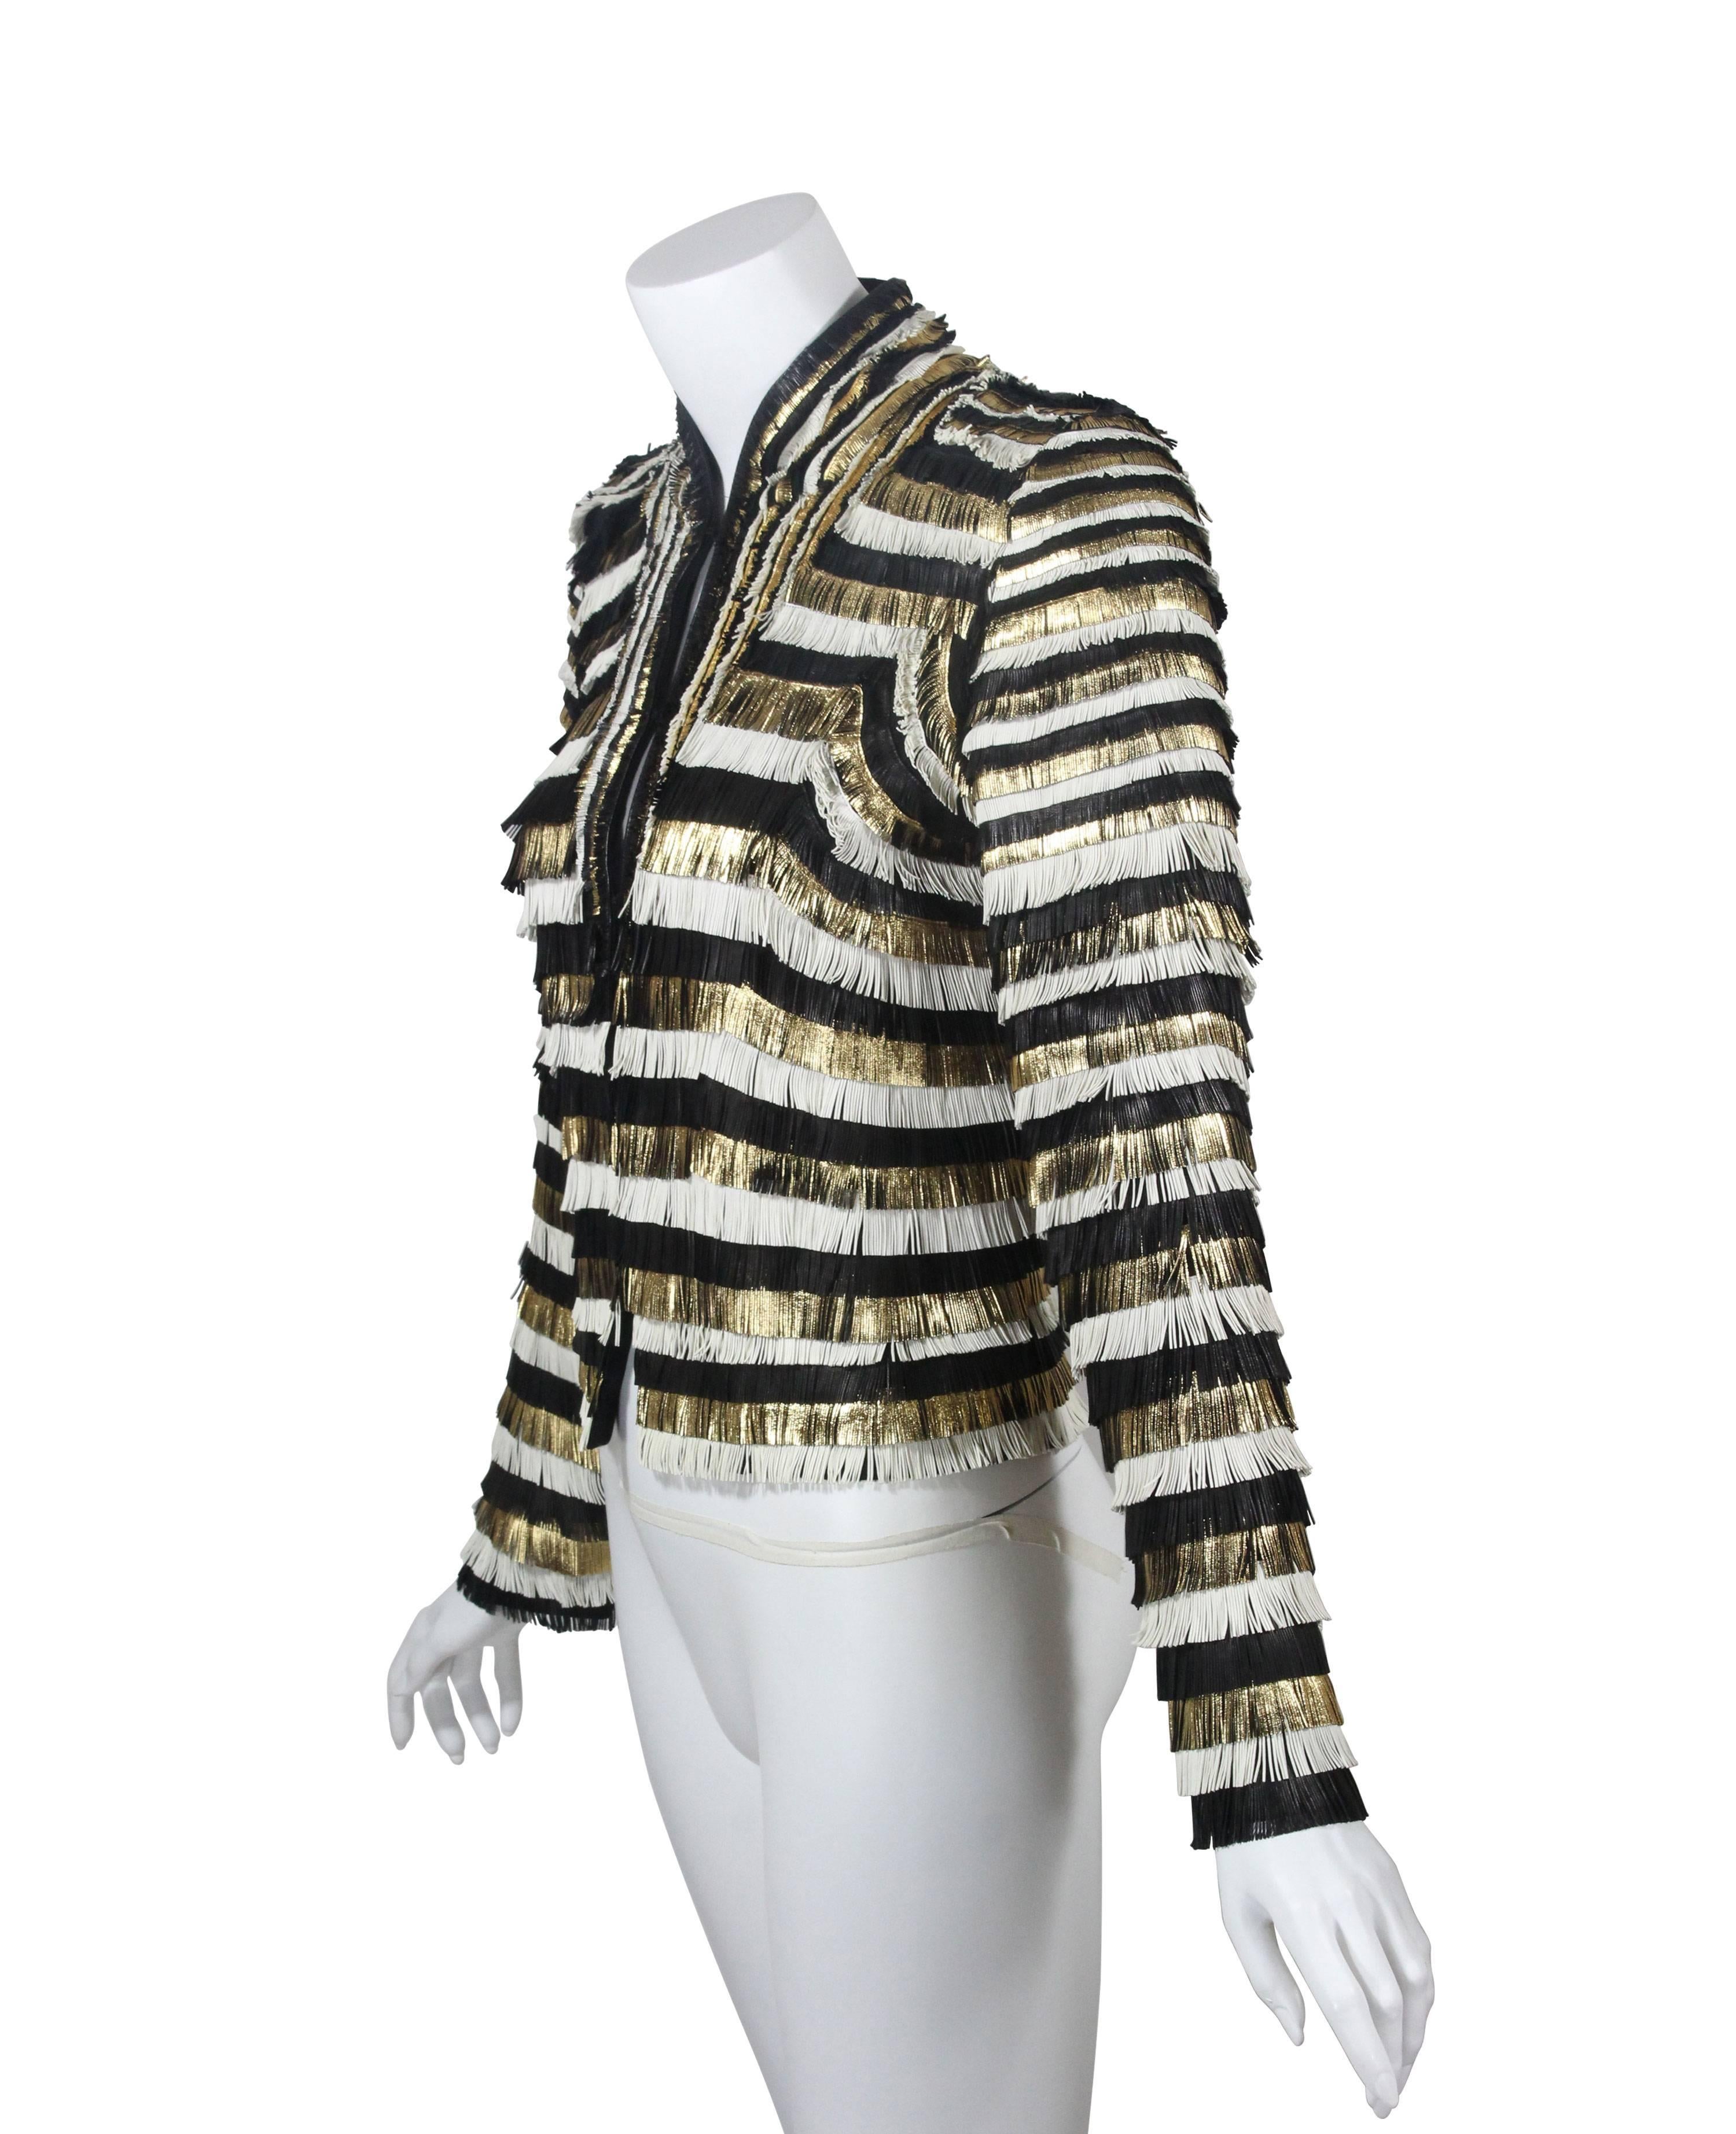 An incredible Gucci leather jacket. The entire jacket is done in rows of fine fringe leather in black, metallic gold and white  sewn onto silk.  The fringe varies from micro length at the top of the shoulders and gets slightly longer layer by layer